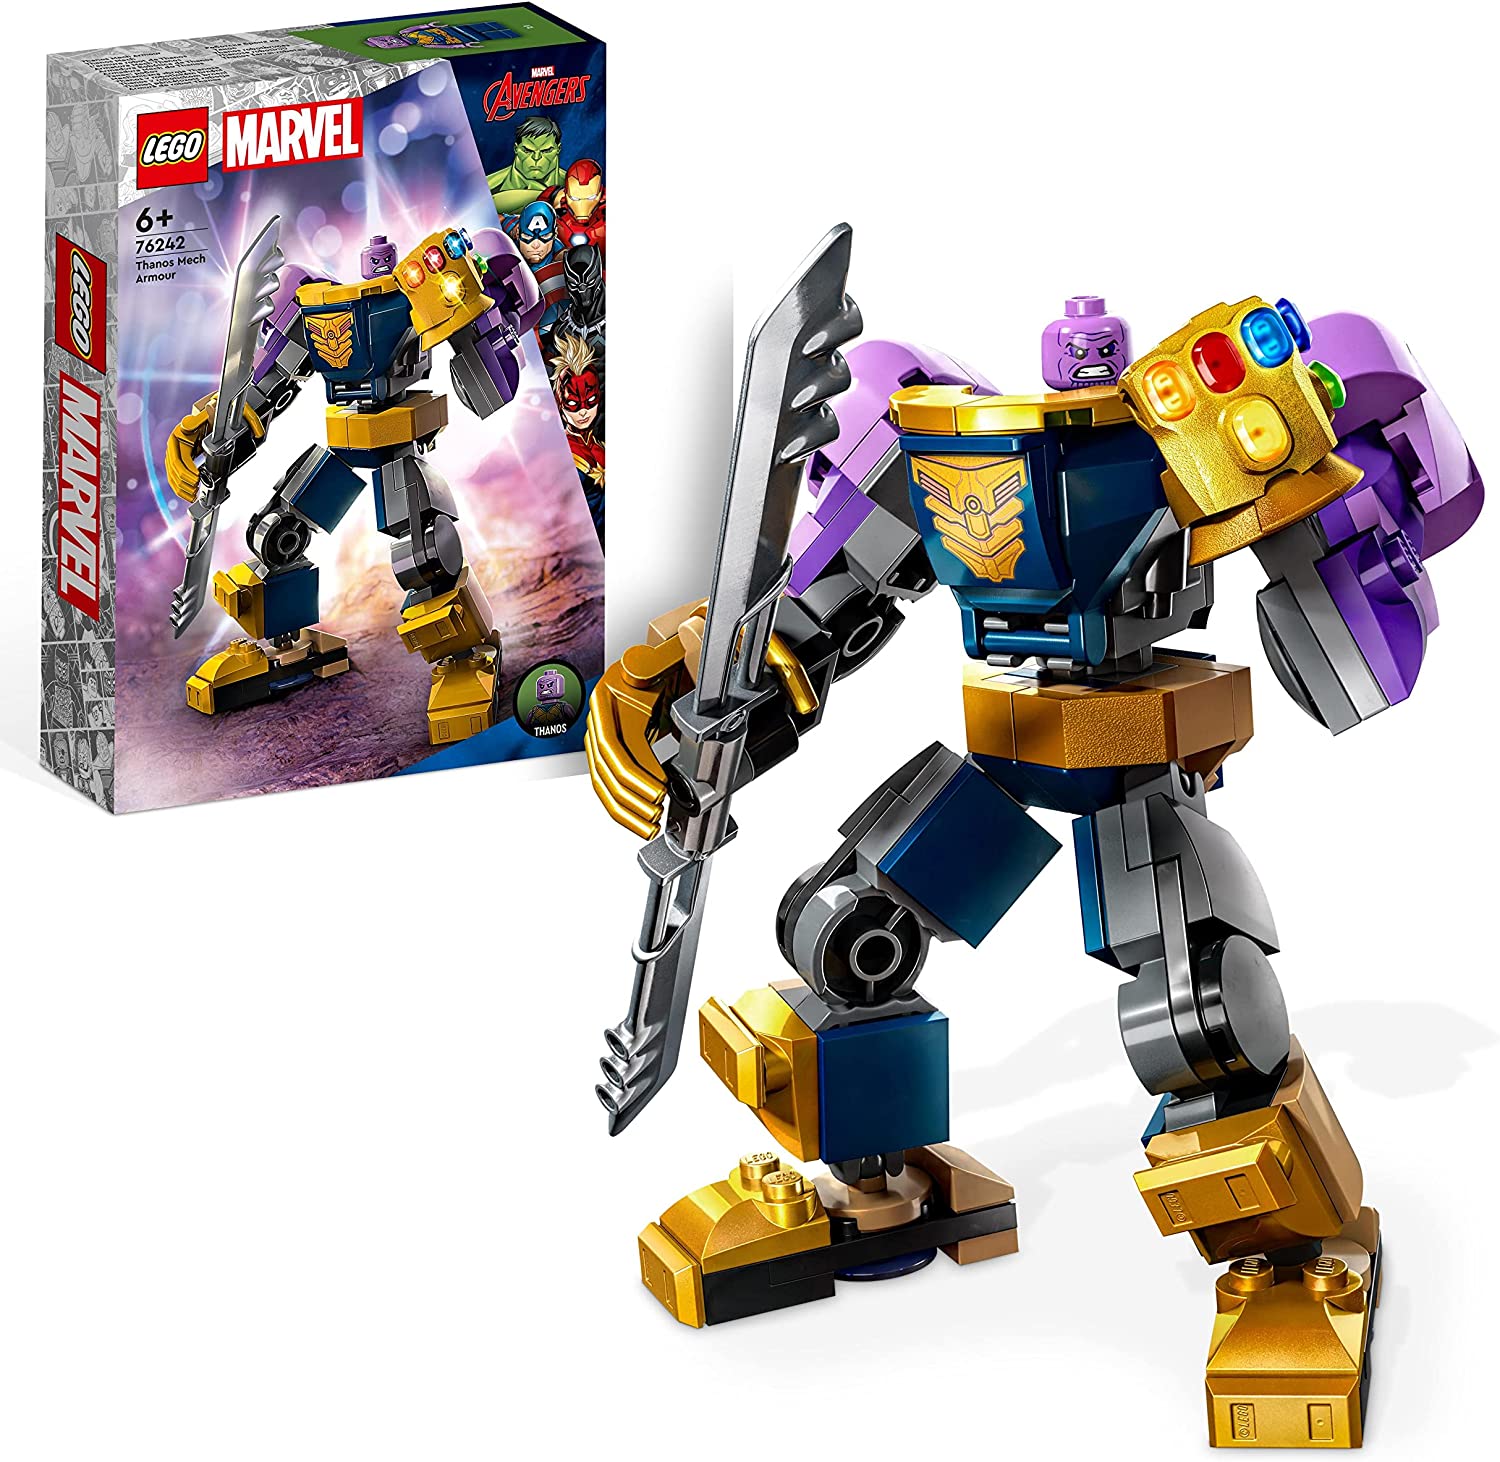 LEGO 76242 Marvel Thanos Mech Set, Action Figure with Infinity Gauntlet, Avengers Superhero Gift for Collecting and Building for Children from 6 Years